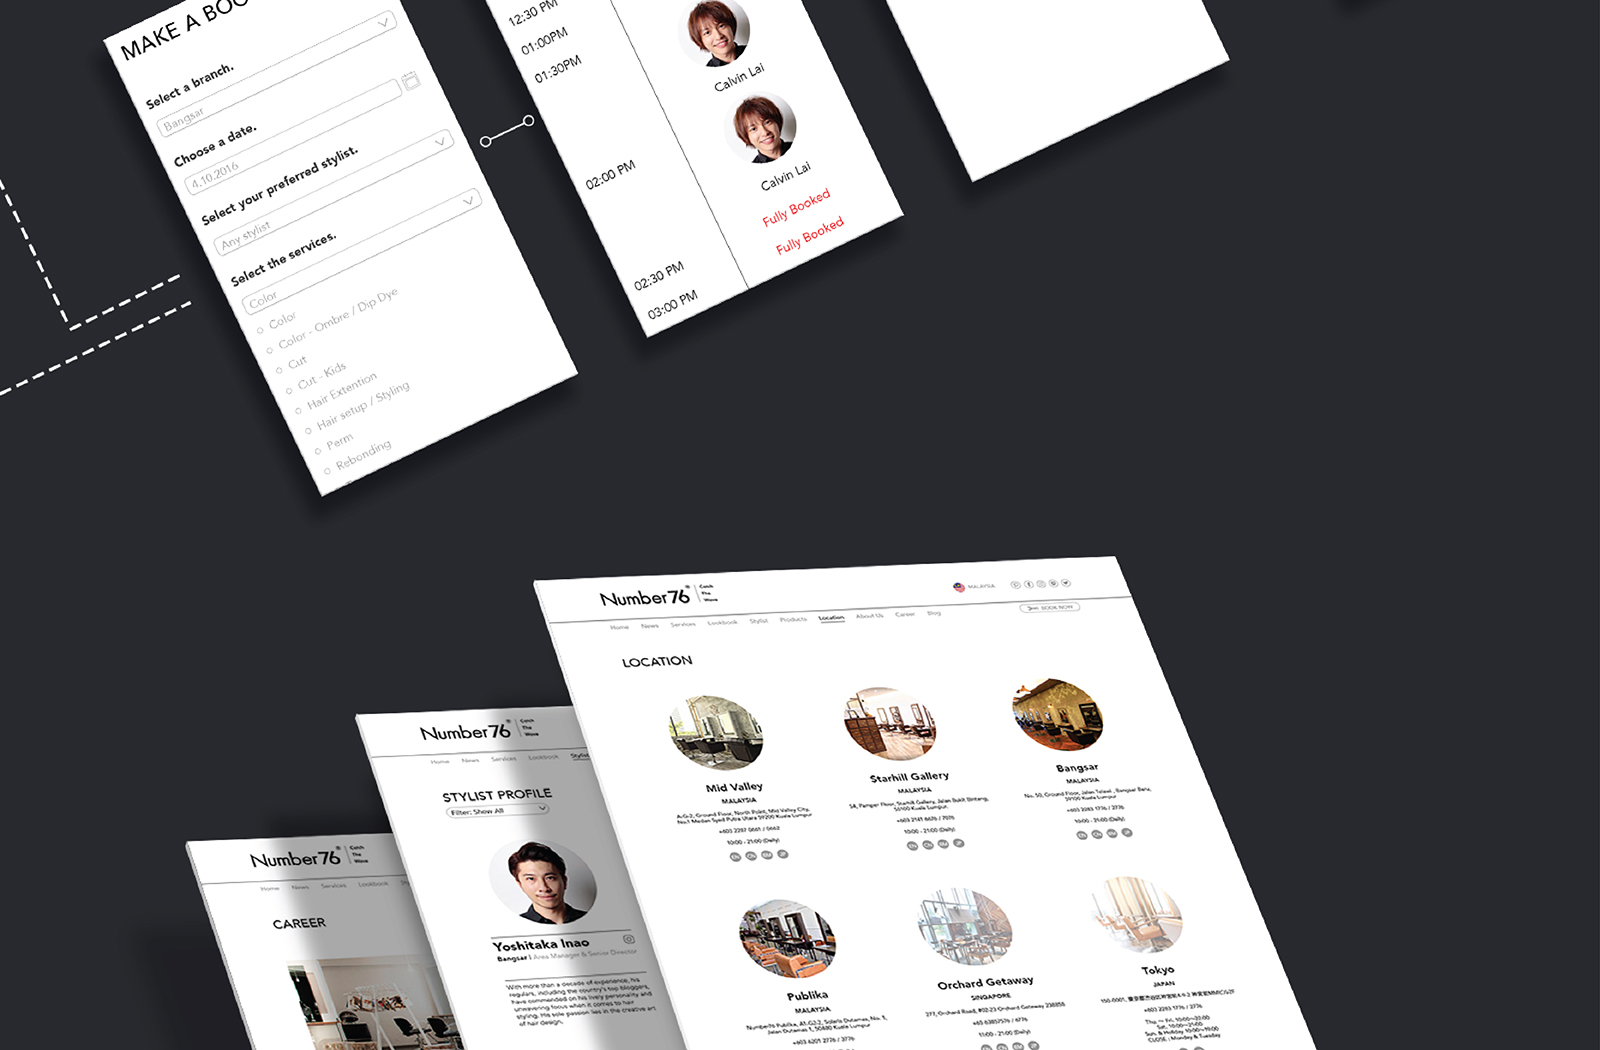 Number76 website user interface and user experience mobile responsive design with new online booking system allowing users to set an appointment at their regular store and stylist more conveniently together with pages showing stylist and location